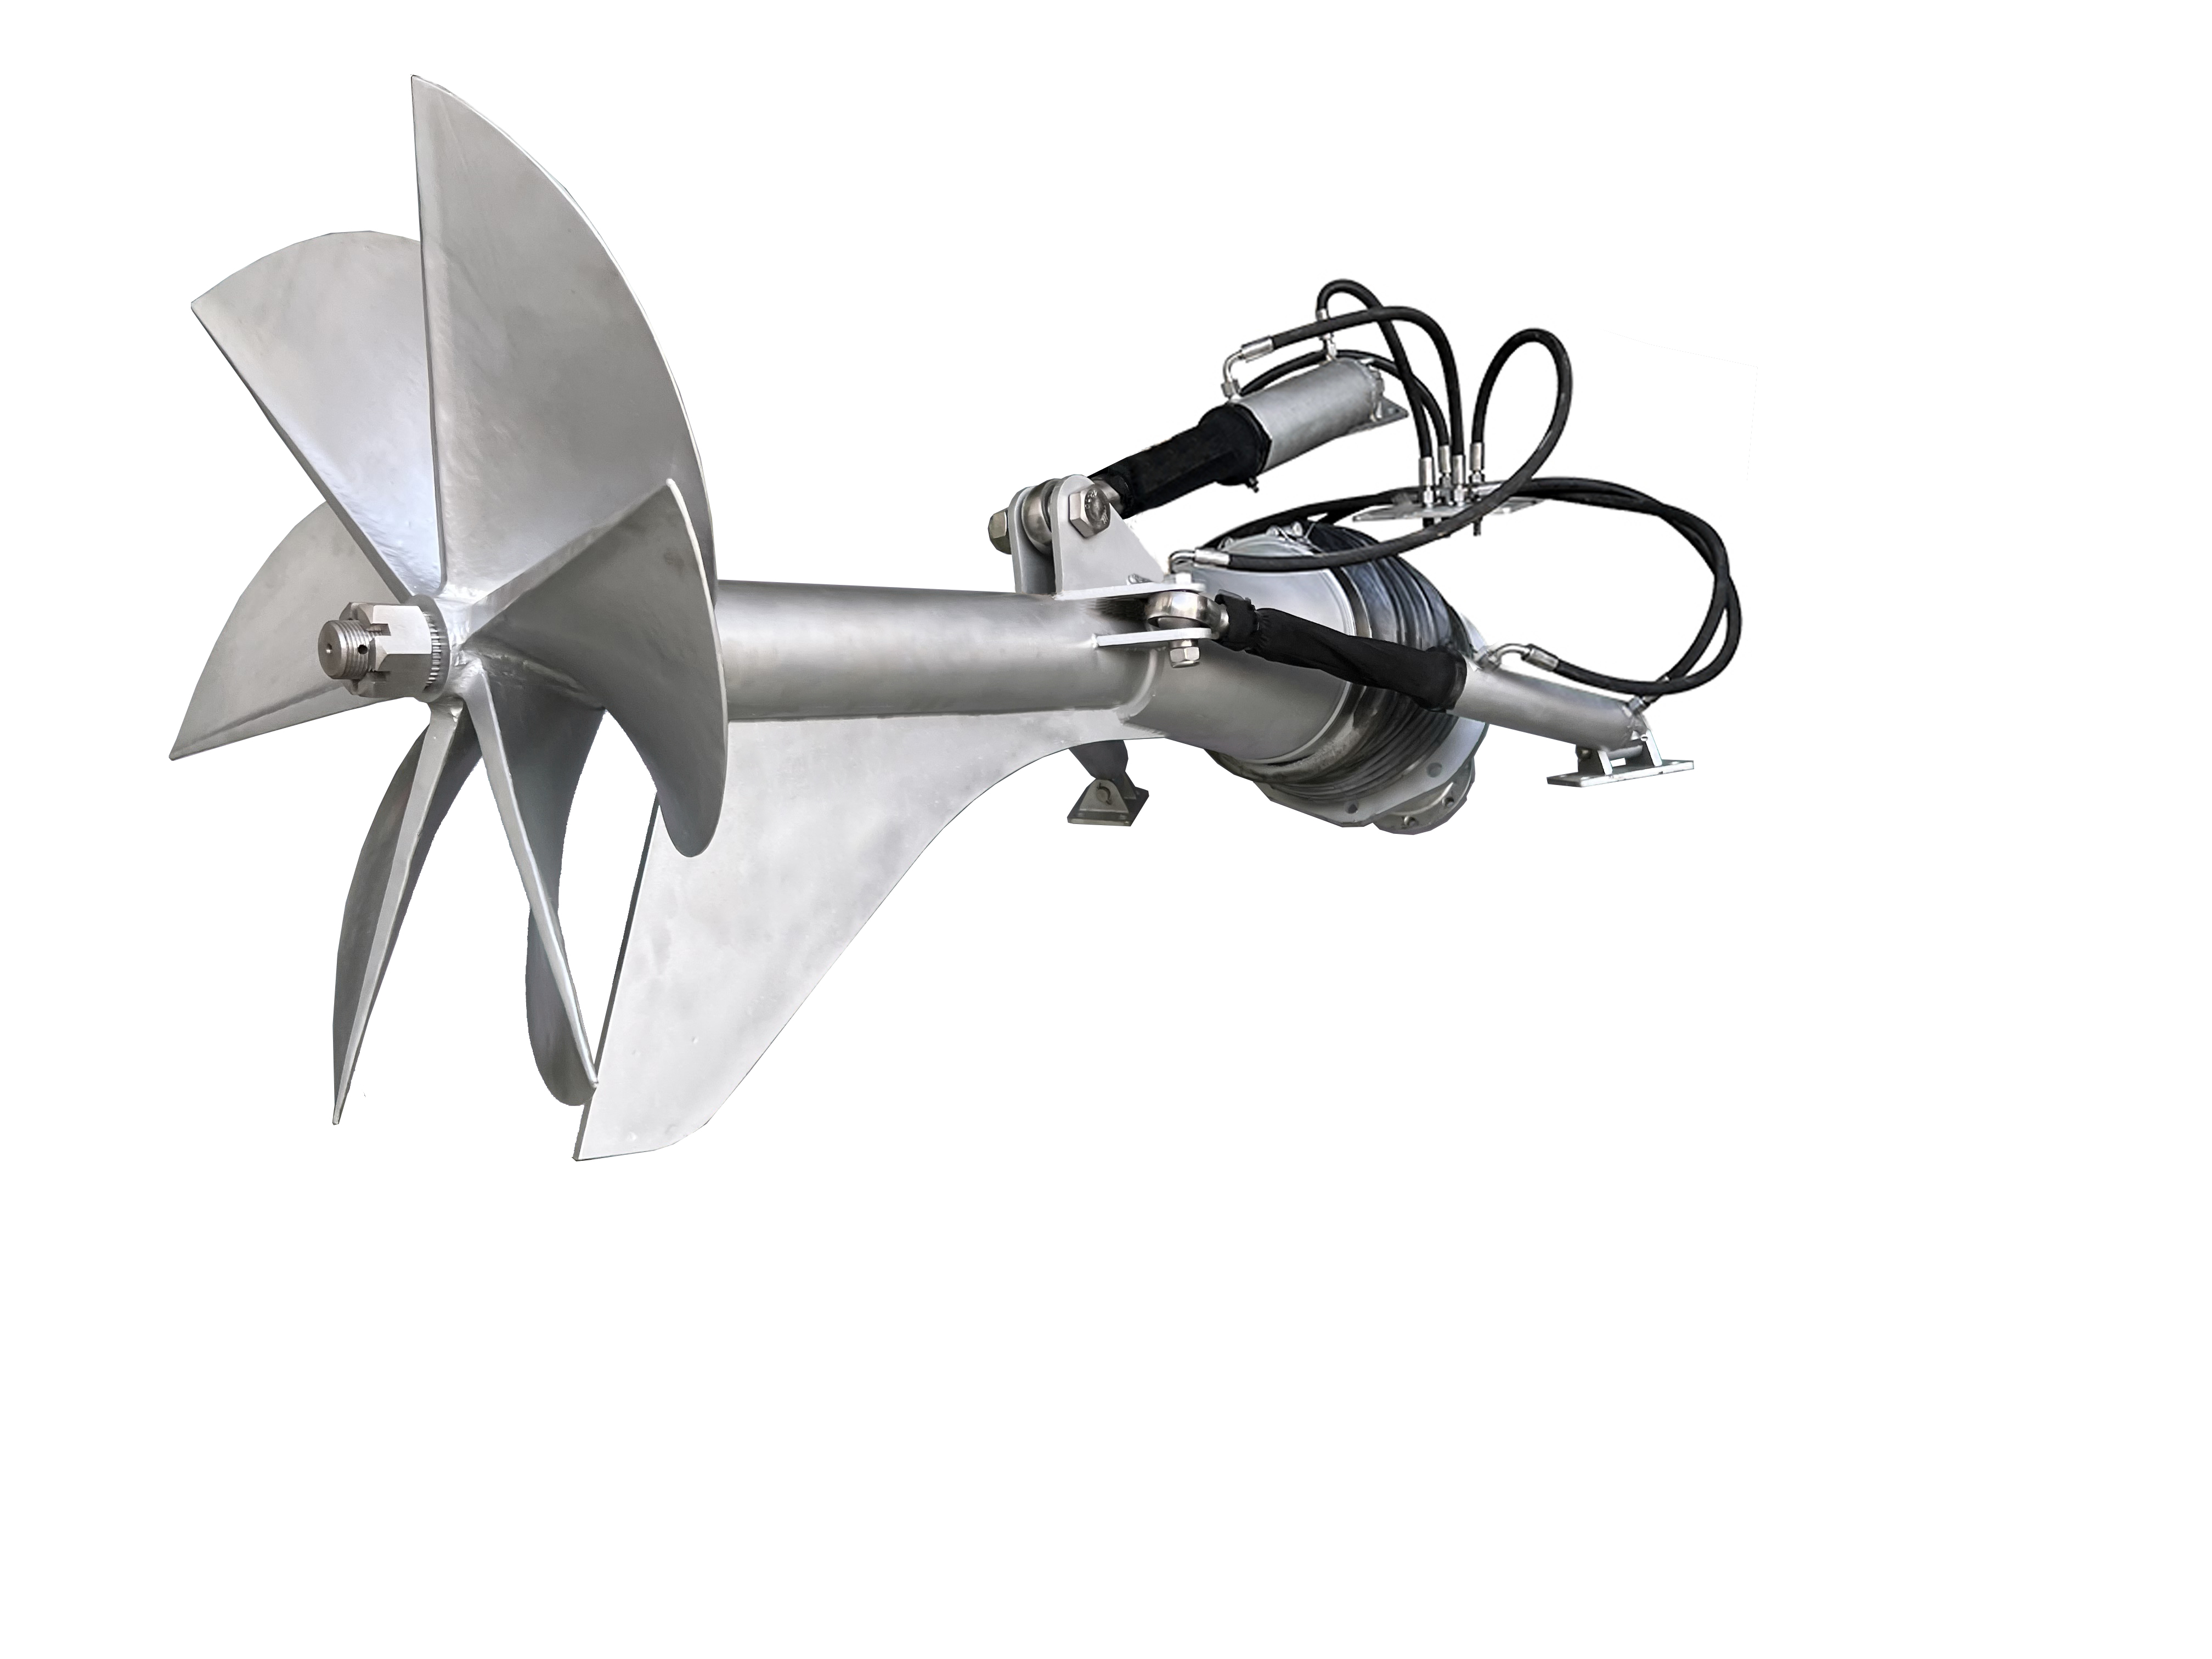 BH660 Surface Drive/surface Piercing Propeller/model Boat Propellers for High Speed Application Boats